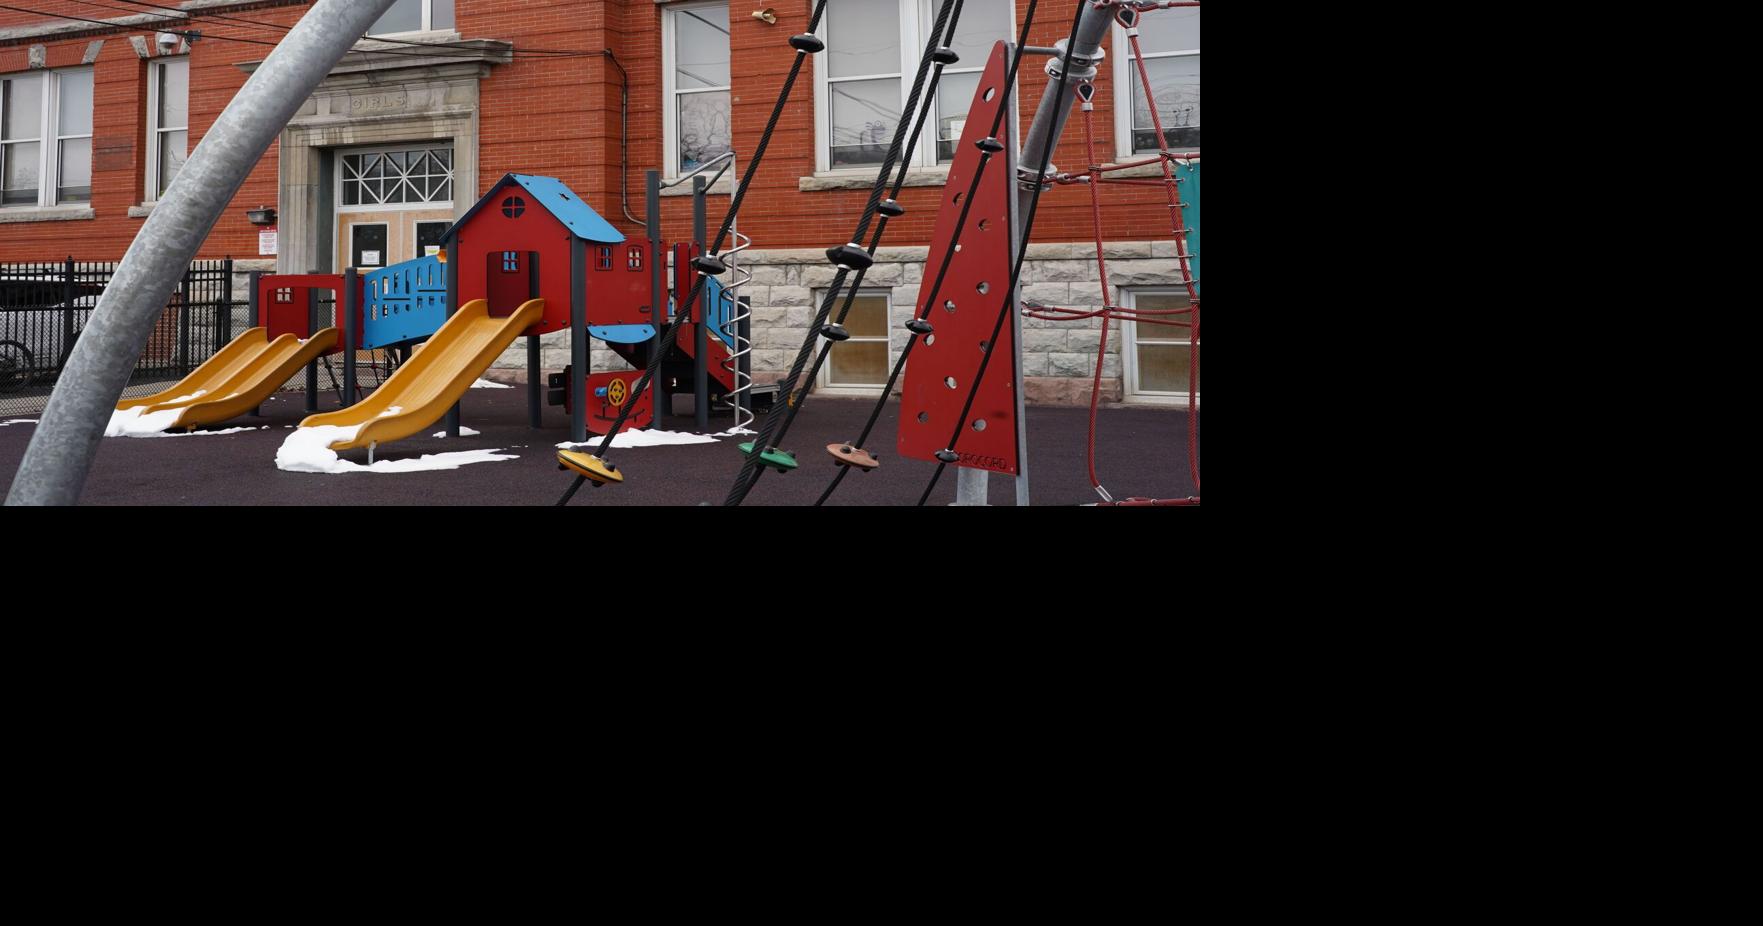 Buffalo Schools begins process for new playgrounds